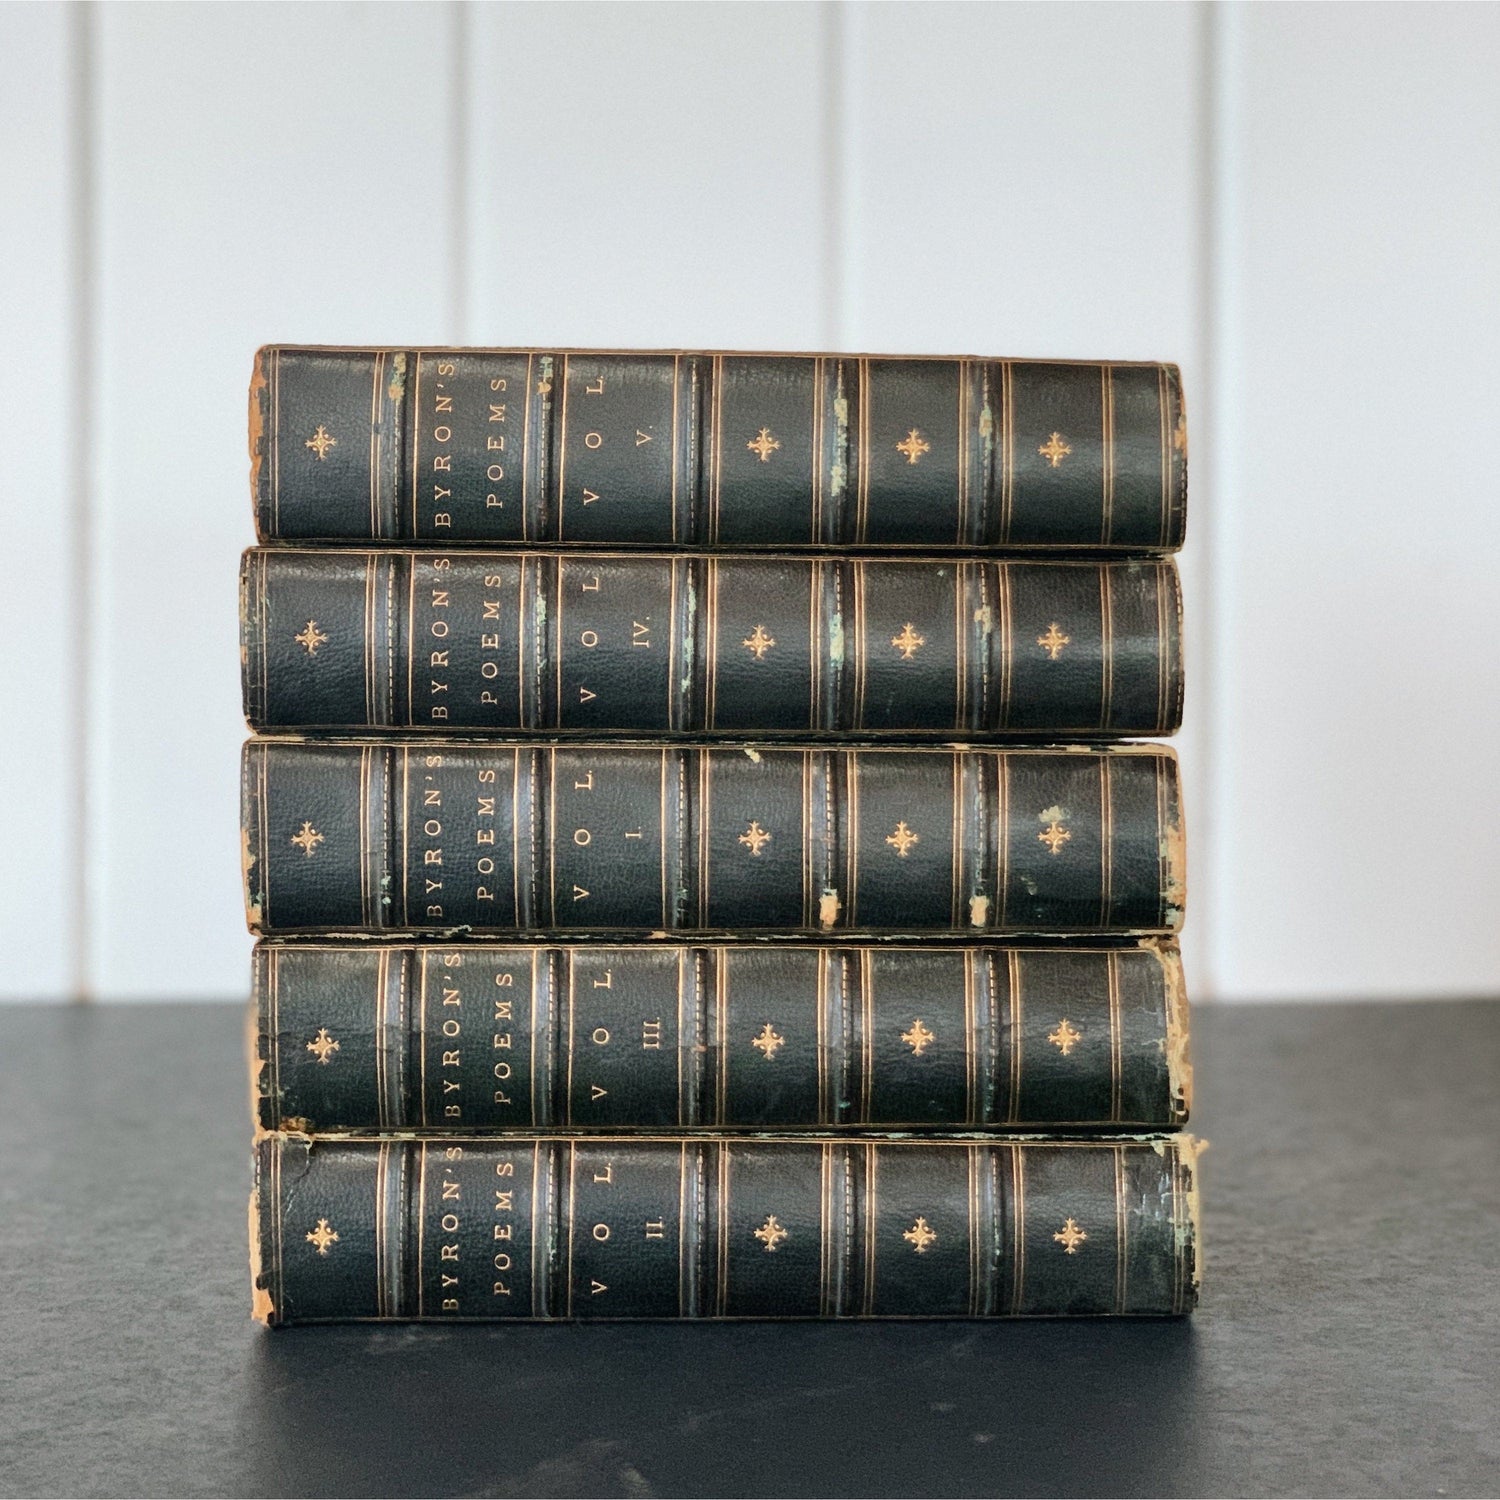 The Poetical Works of Lord Byron With a Memoir, 1860, Five Volume Set, Leather Bound